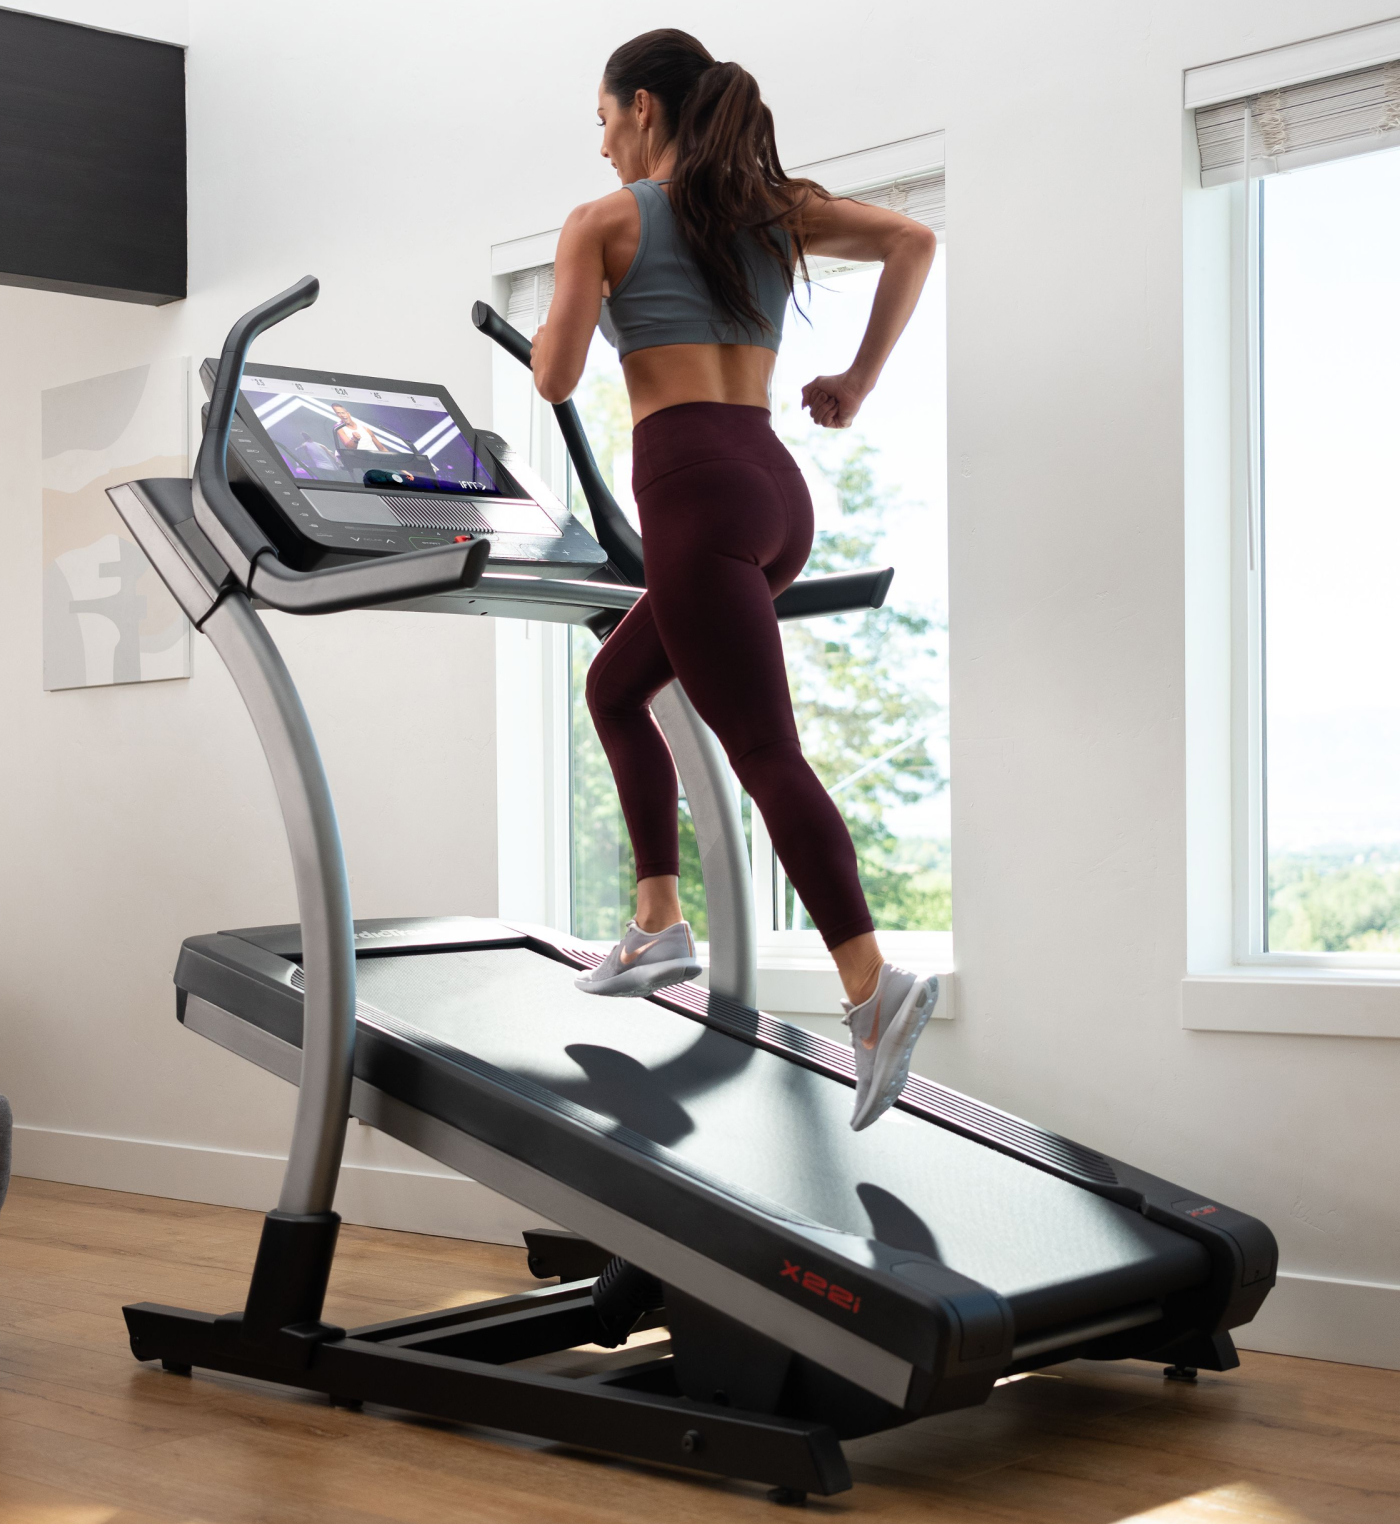 The Best Cardio Workouts at Home to Boost Your Fitness Without a Treadmill